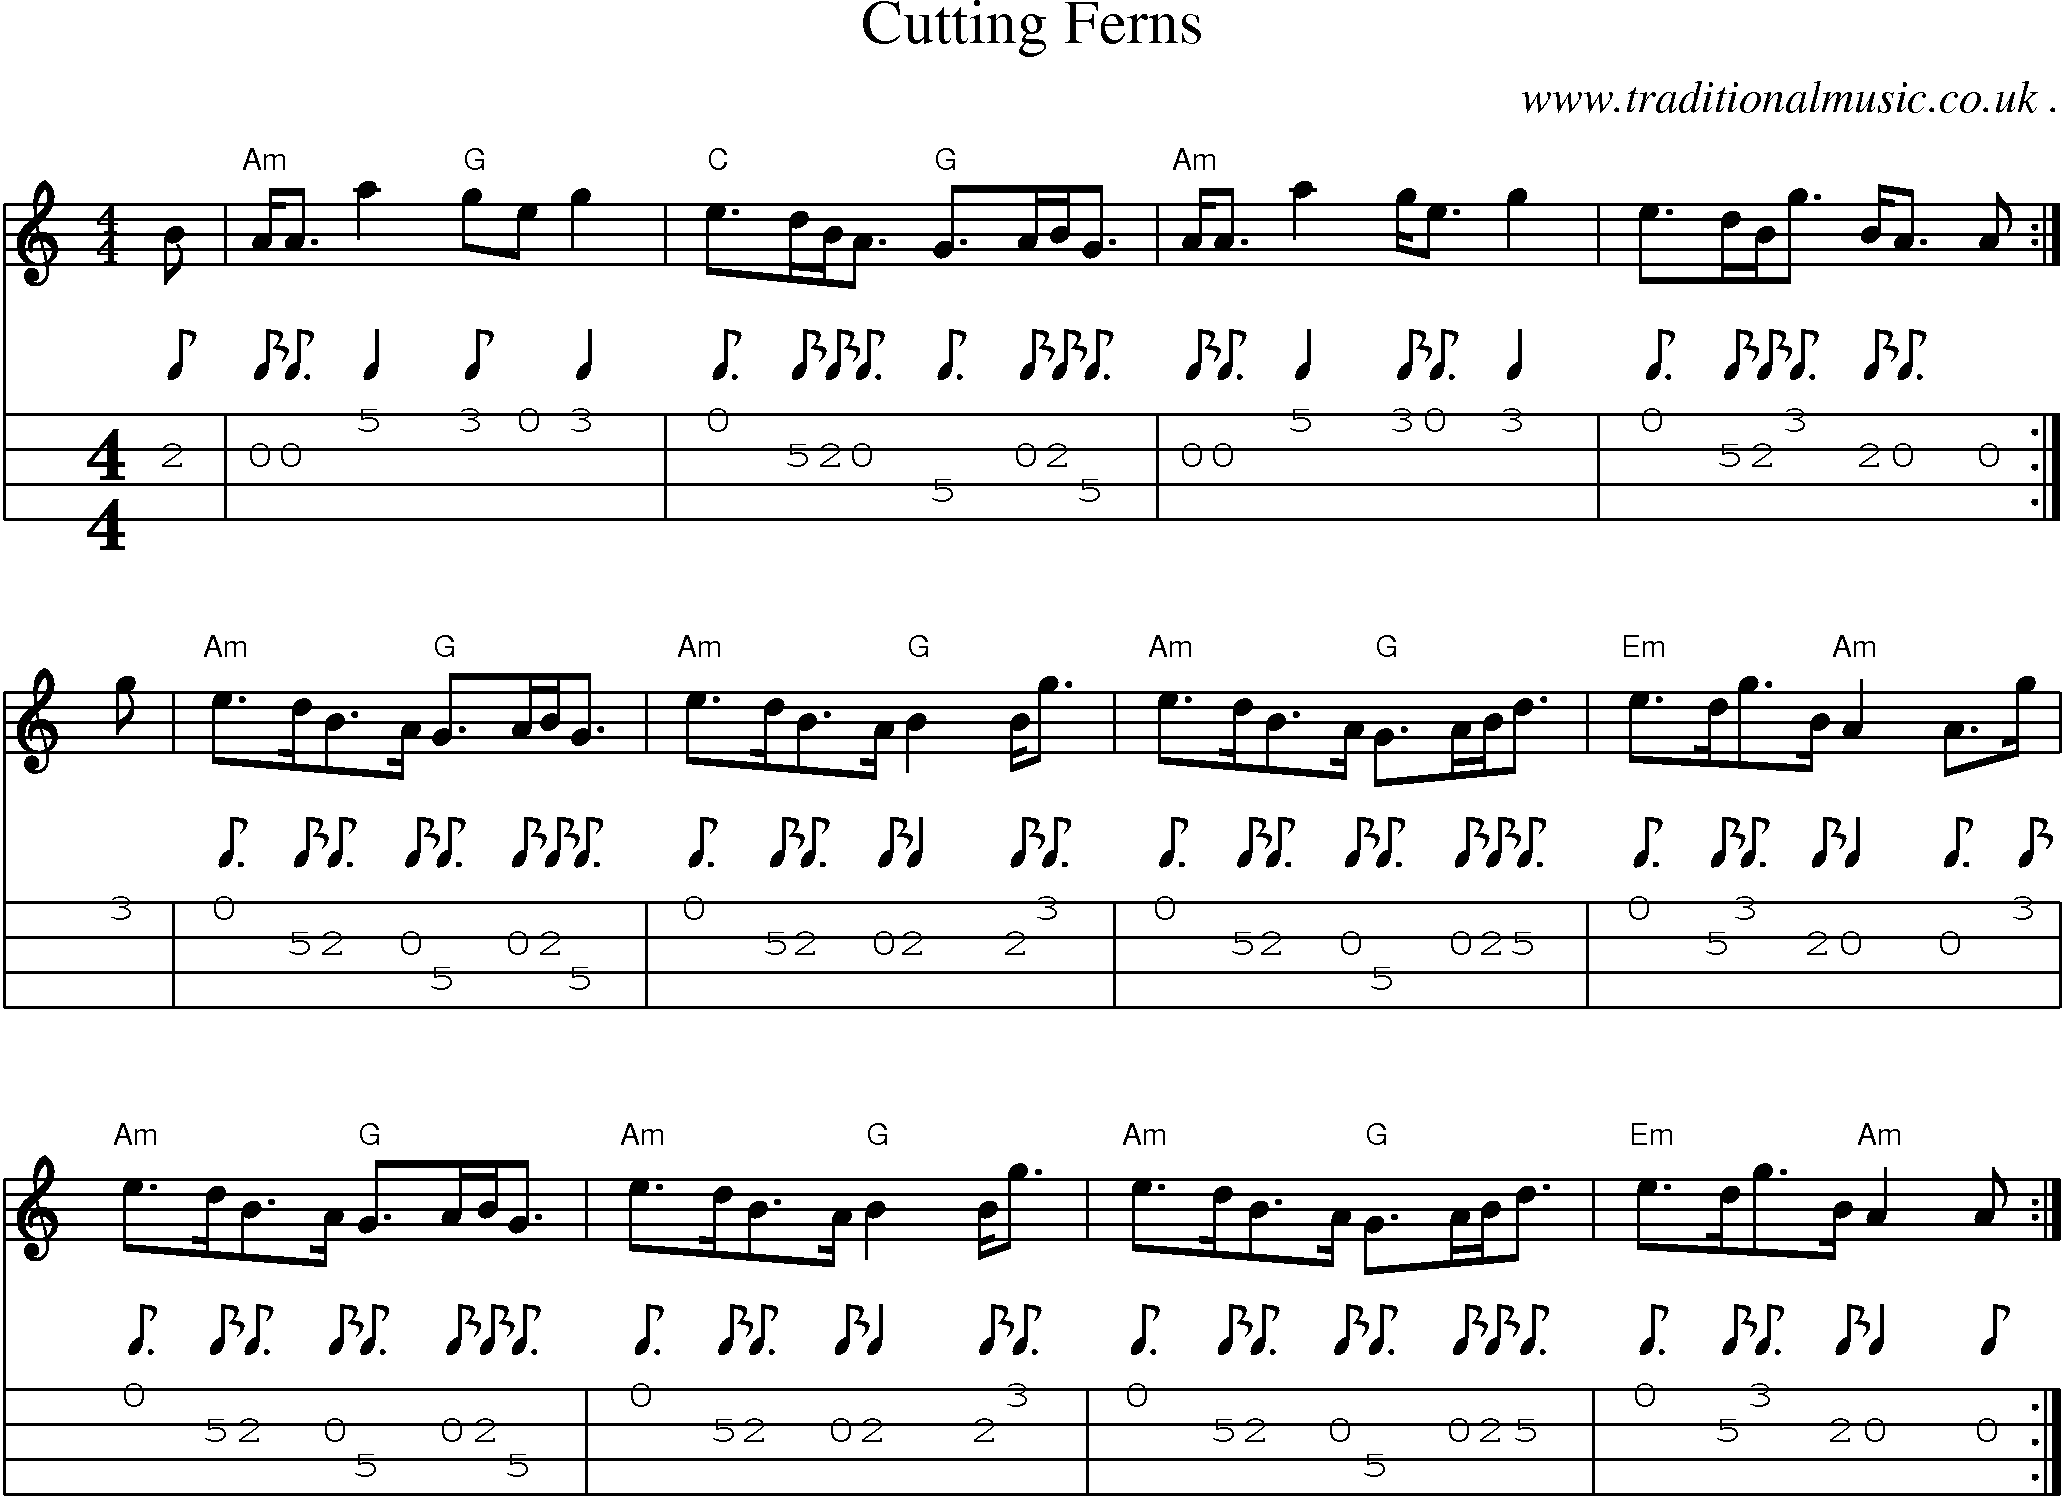 Sheet-music  score, Chords and Mandolin Tabs for Cutting Ferns